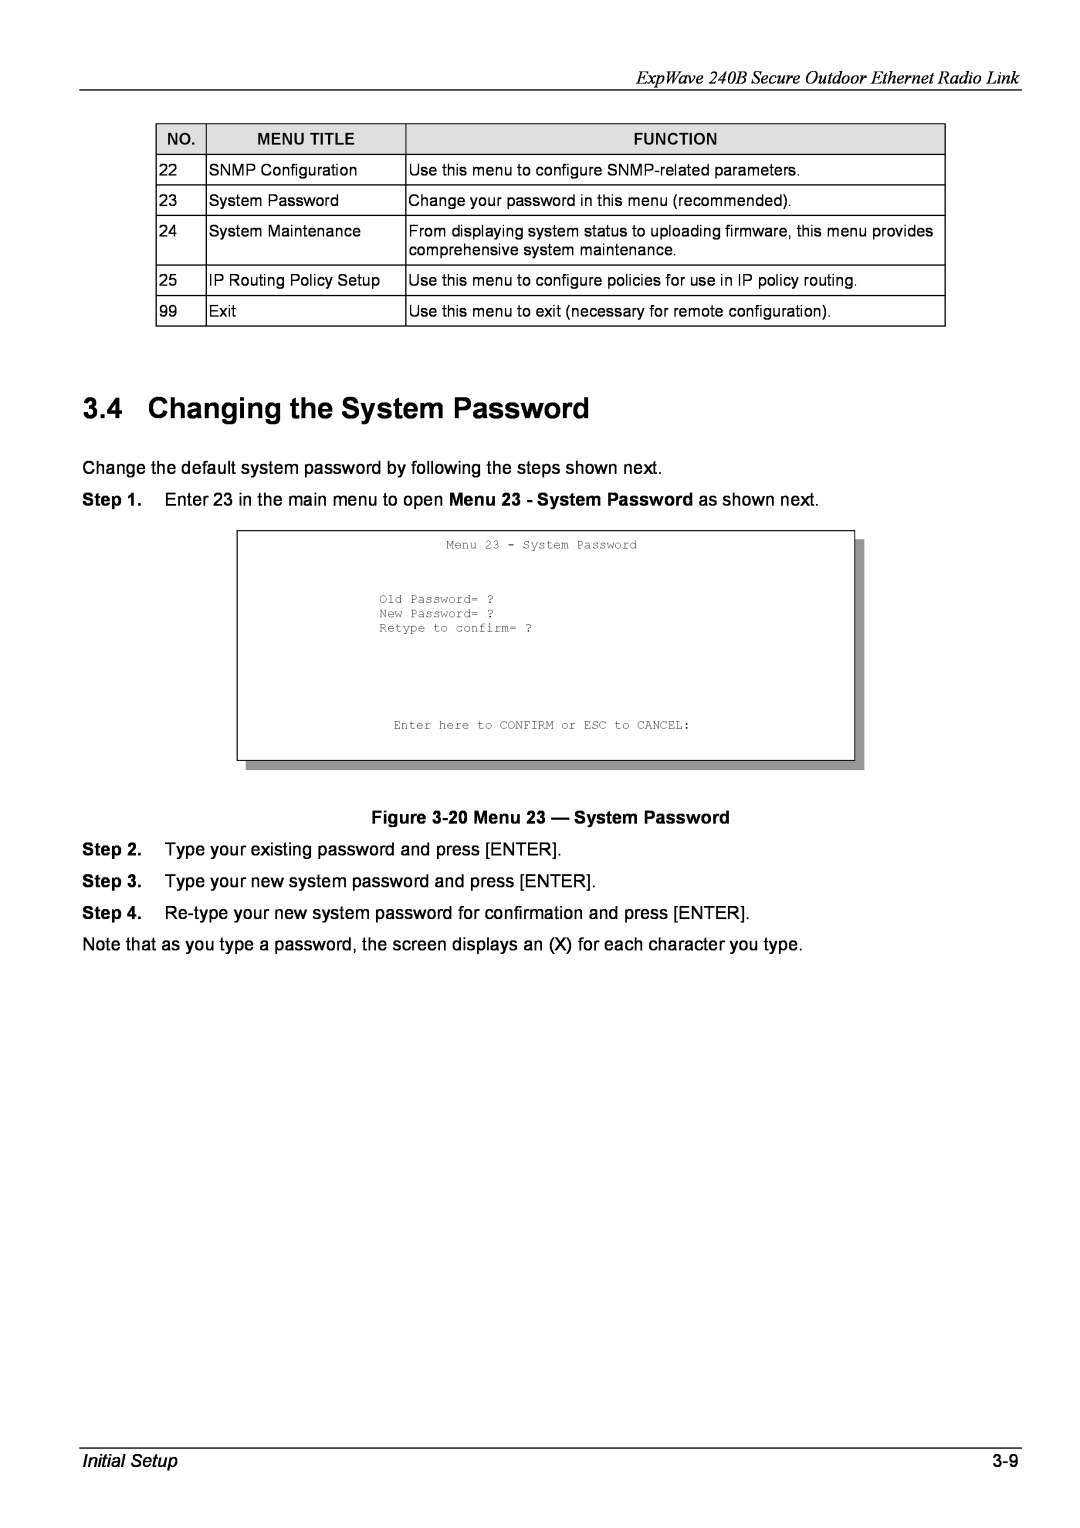 ZyXEL Communications 240B manual Changing the System Password, 20 Menu 23 - System Password, Initial Setup 